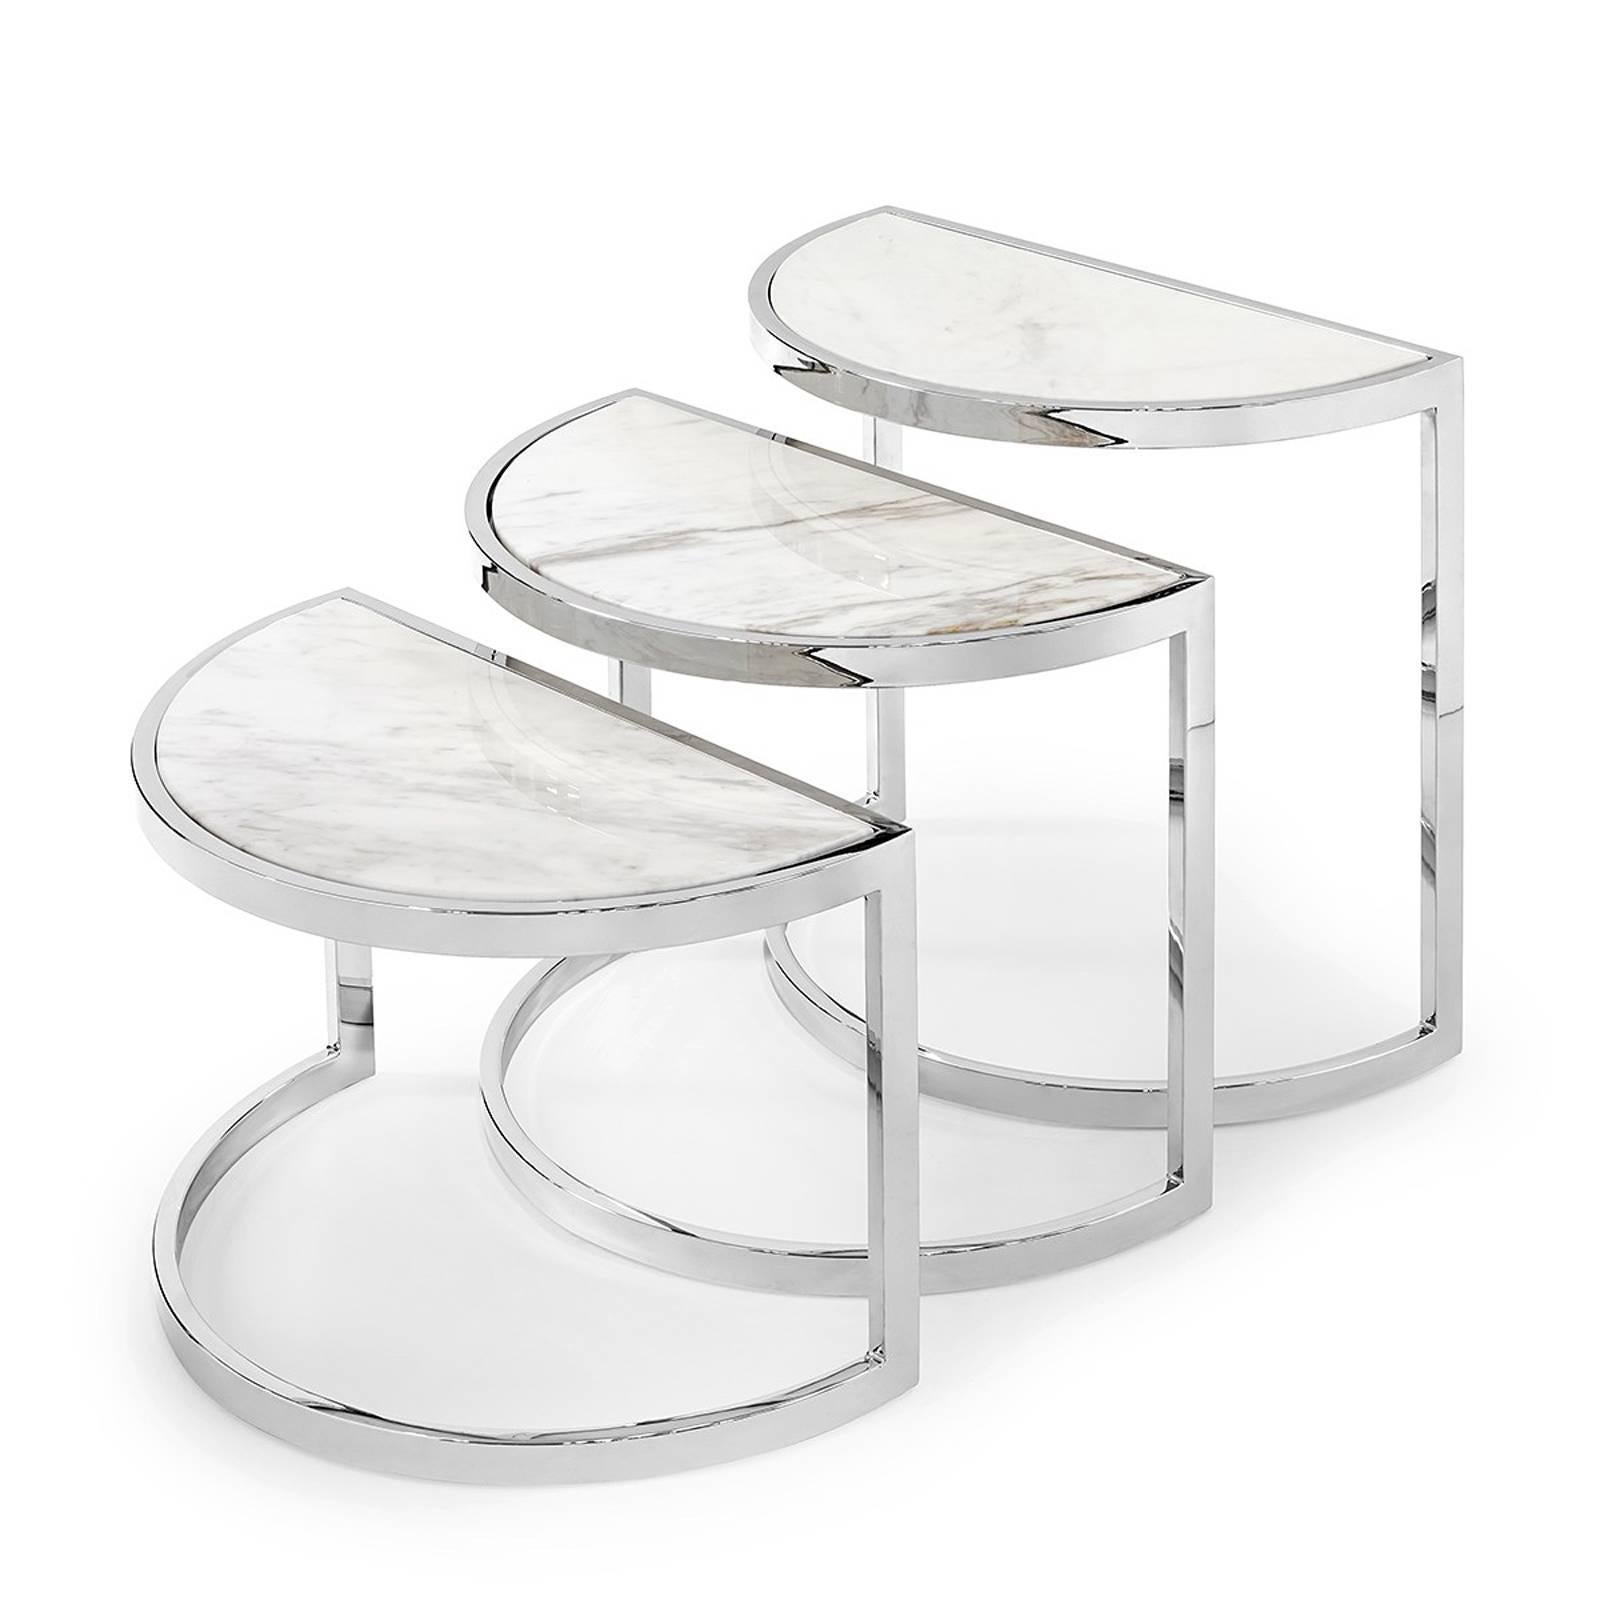 Side table half-moon set of three tables. Structure in 
chrome finish with white marble top.
Also available with blue tempered glass top.
Measures: L 54 x D 30 x H 38 cm
L 54 x D 30 x H 46 cm
L 54 x D 30 x H 54 cm
